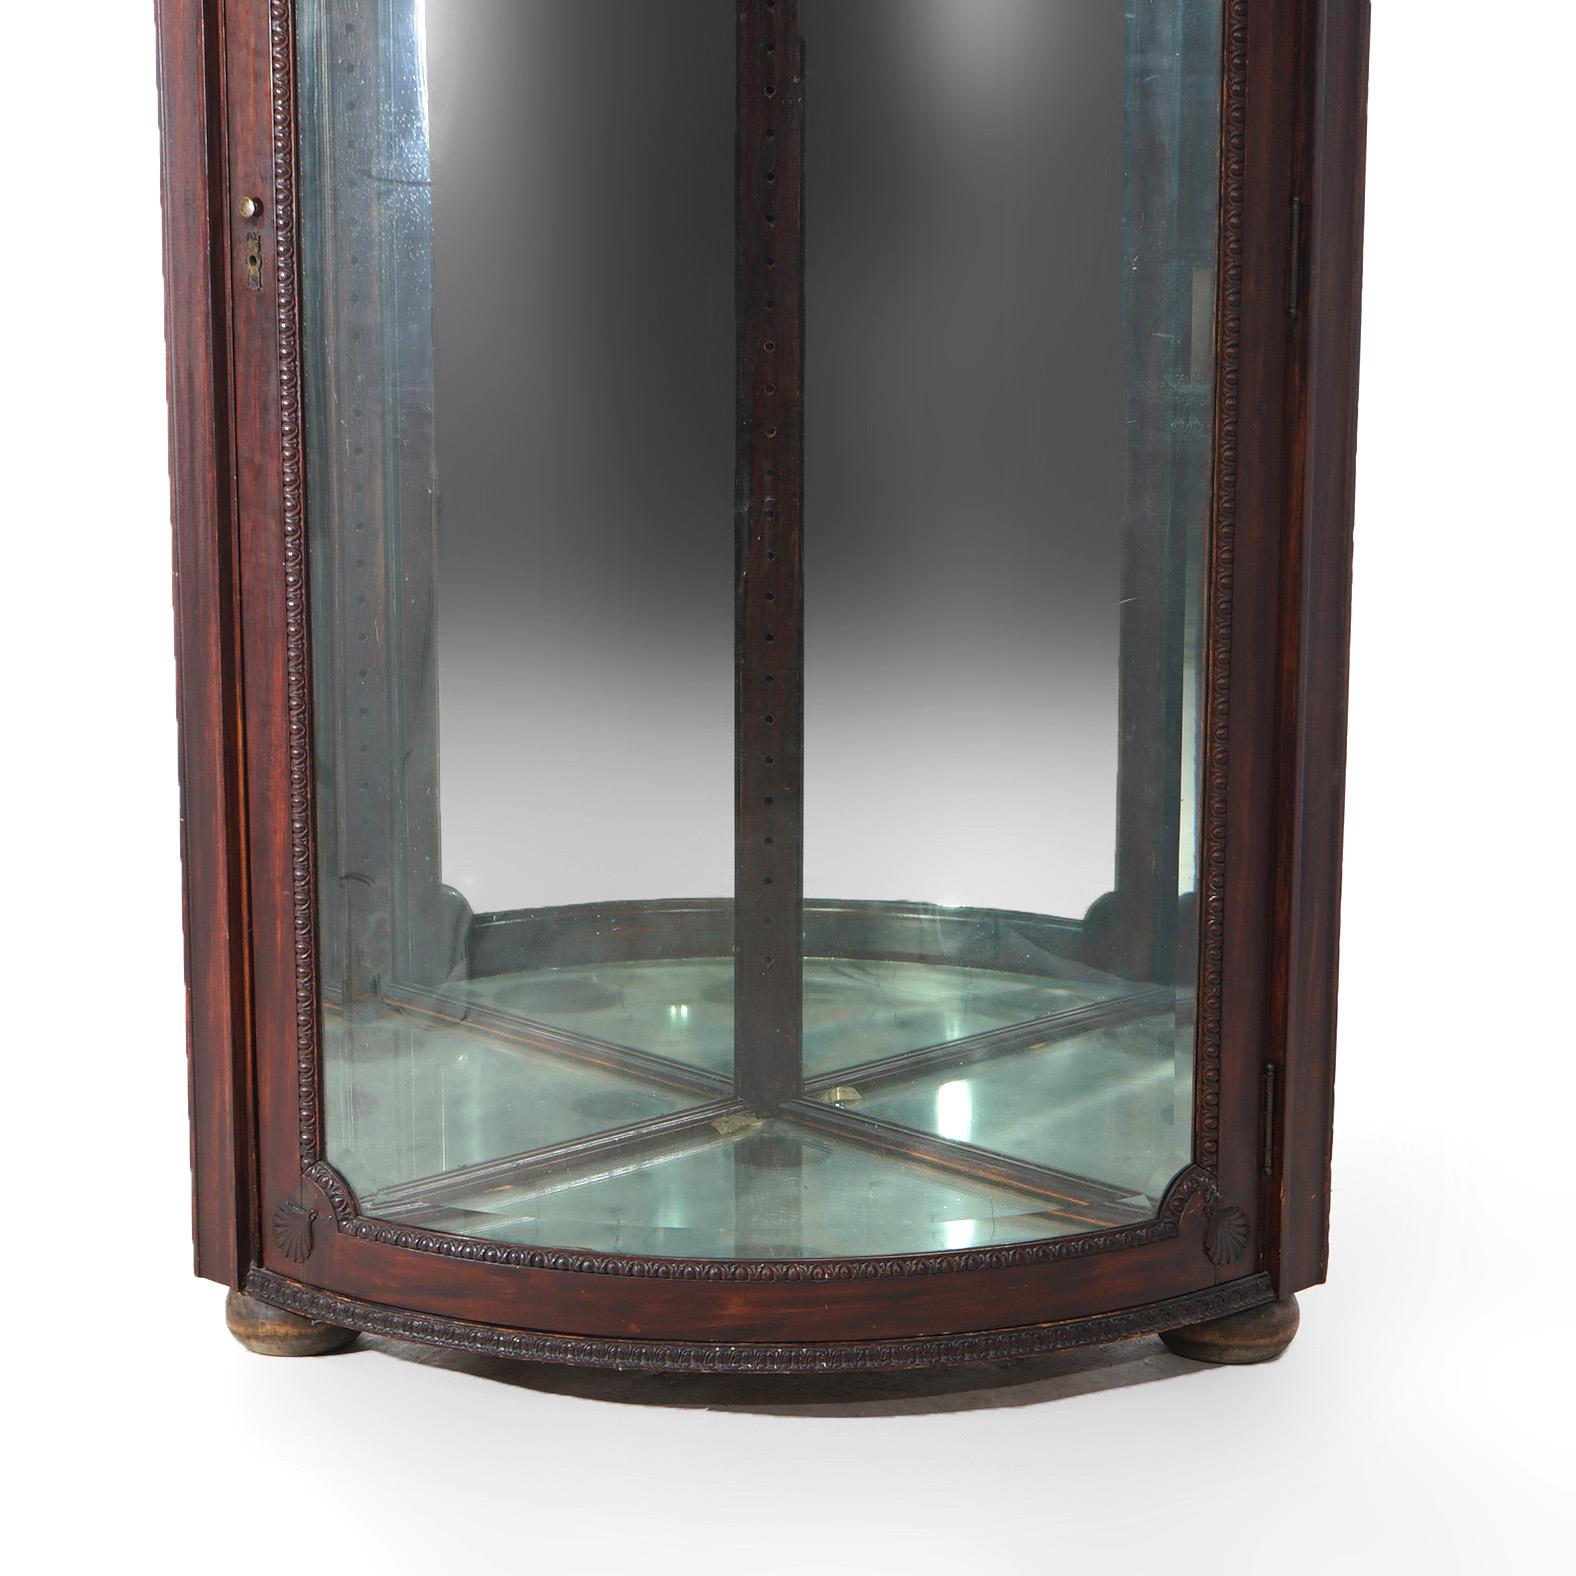 ***Ask About Reduced In-House Shipping Rates - Reliable Service & Fully Insured***

An antique corner china cabinet display case in the manner of RJ Horner offers oak construction with foliate carved crest over cabinet having single curved glass